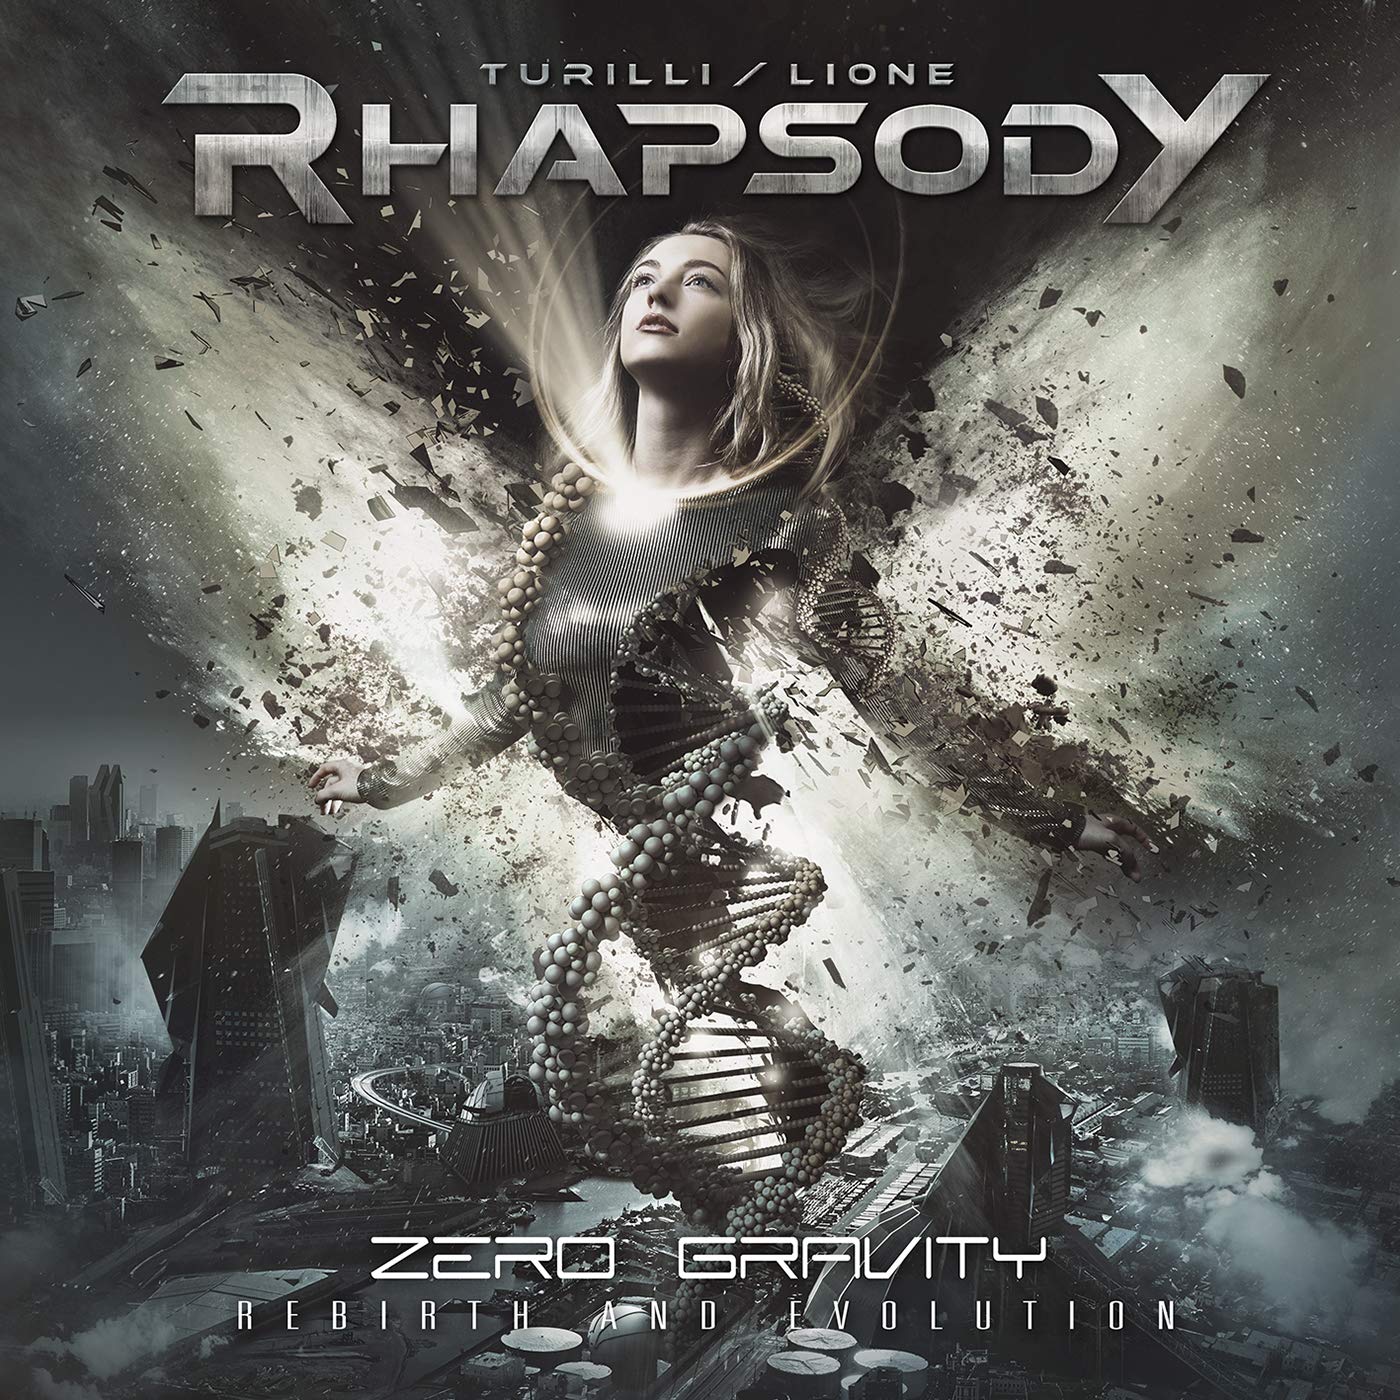 You are currently viewing Turilli/Lione Rhapsody – Zero Gravity (Rebirth and Evolution)